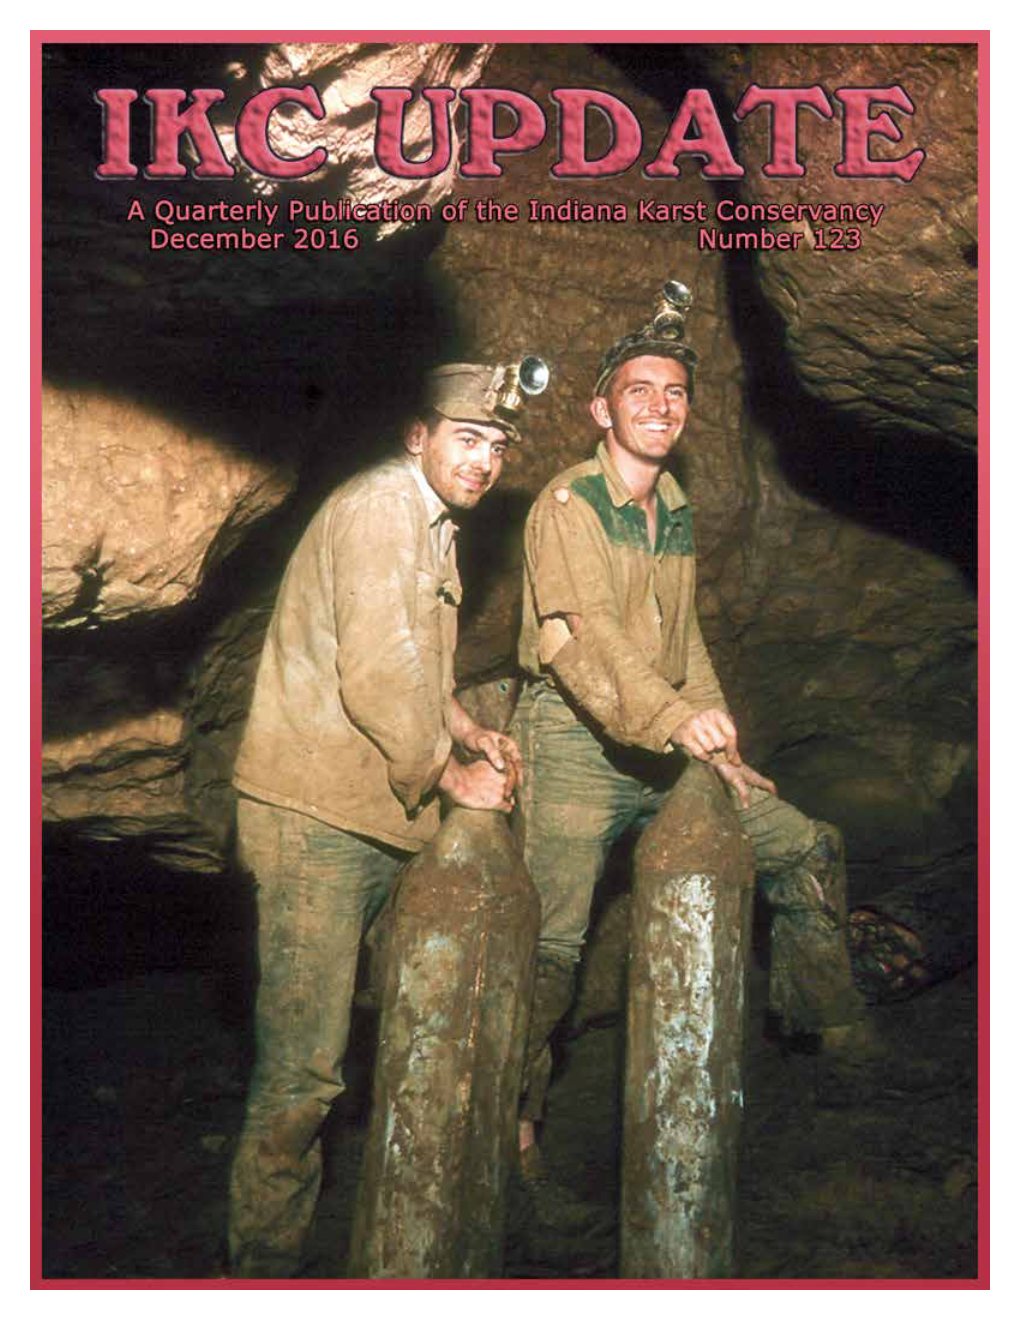 A Chronology of Wayne Cave and Associated Karst Features Monroe County, Indiana – 1949 to 2016 with Comments by Tom Sollman